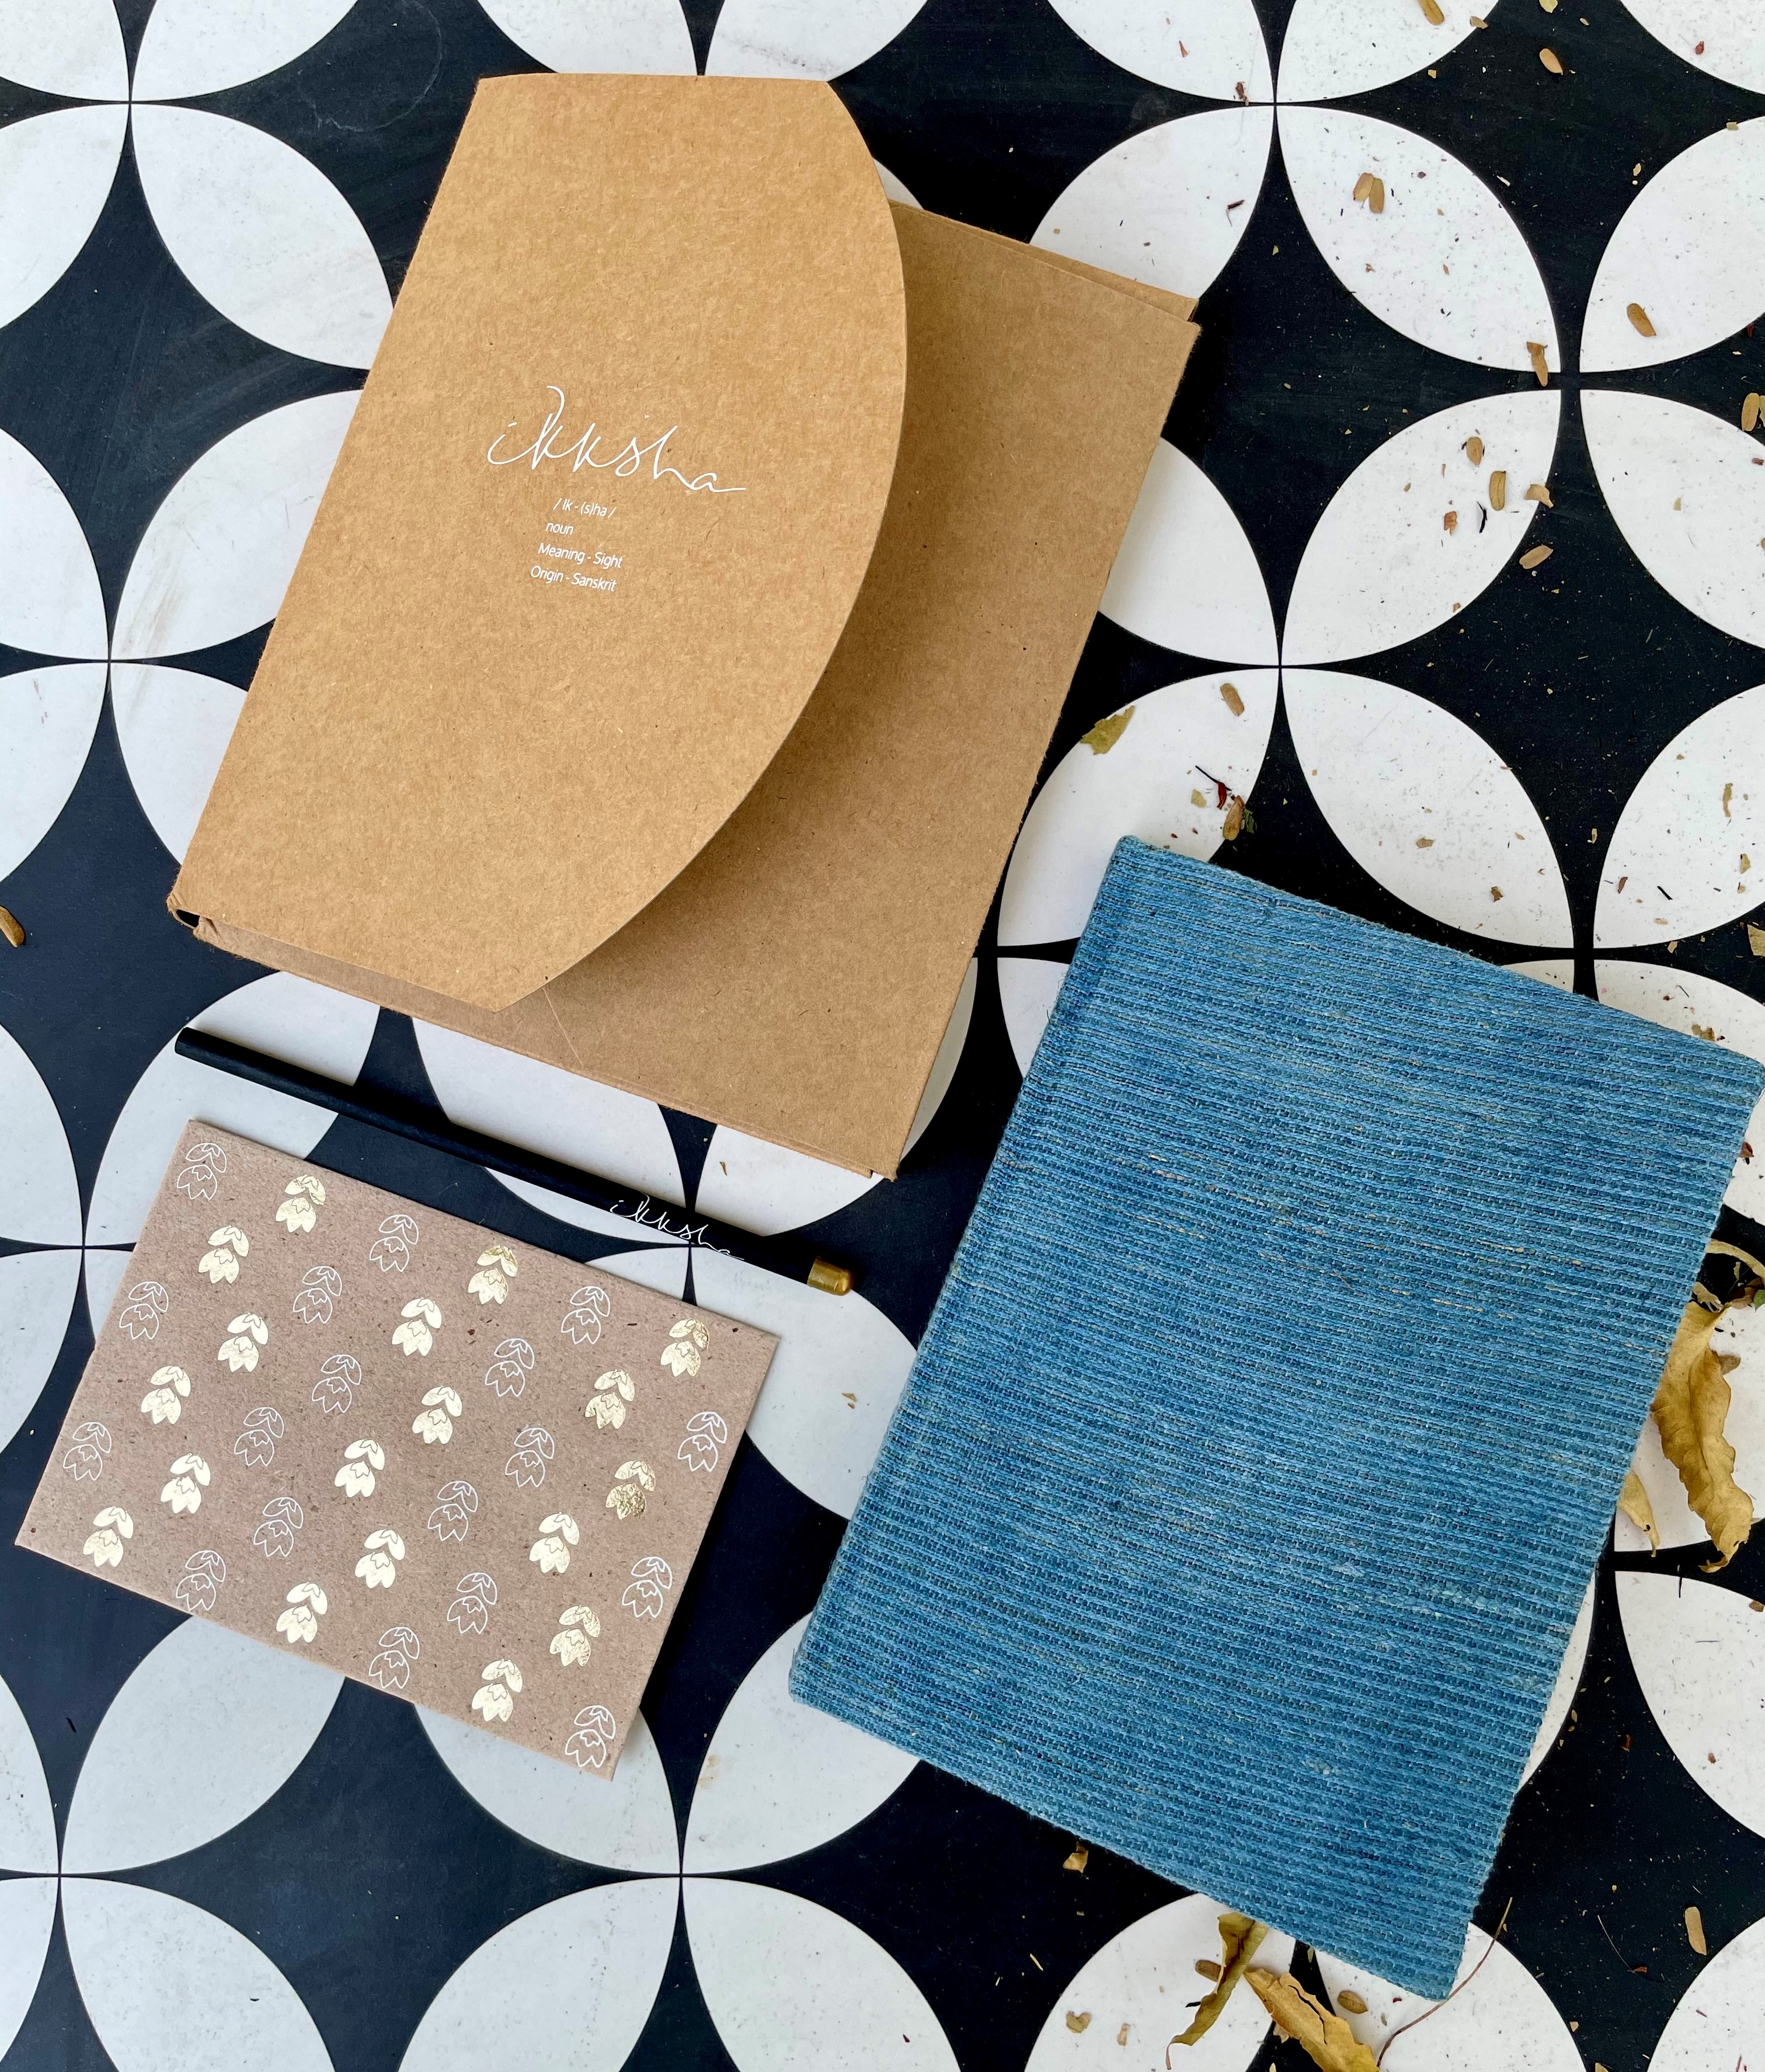 Sustainable stationery brand in India - Ikksha recycled paper